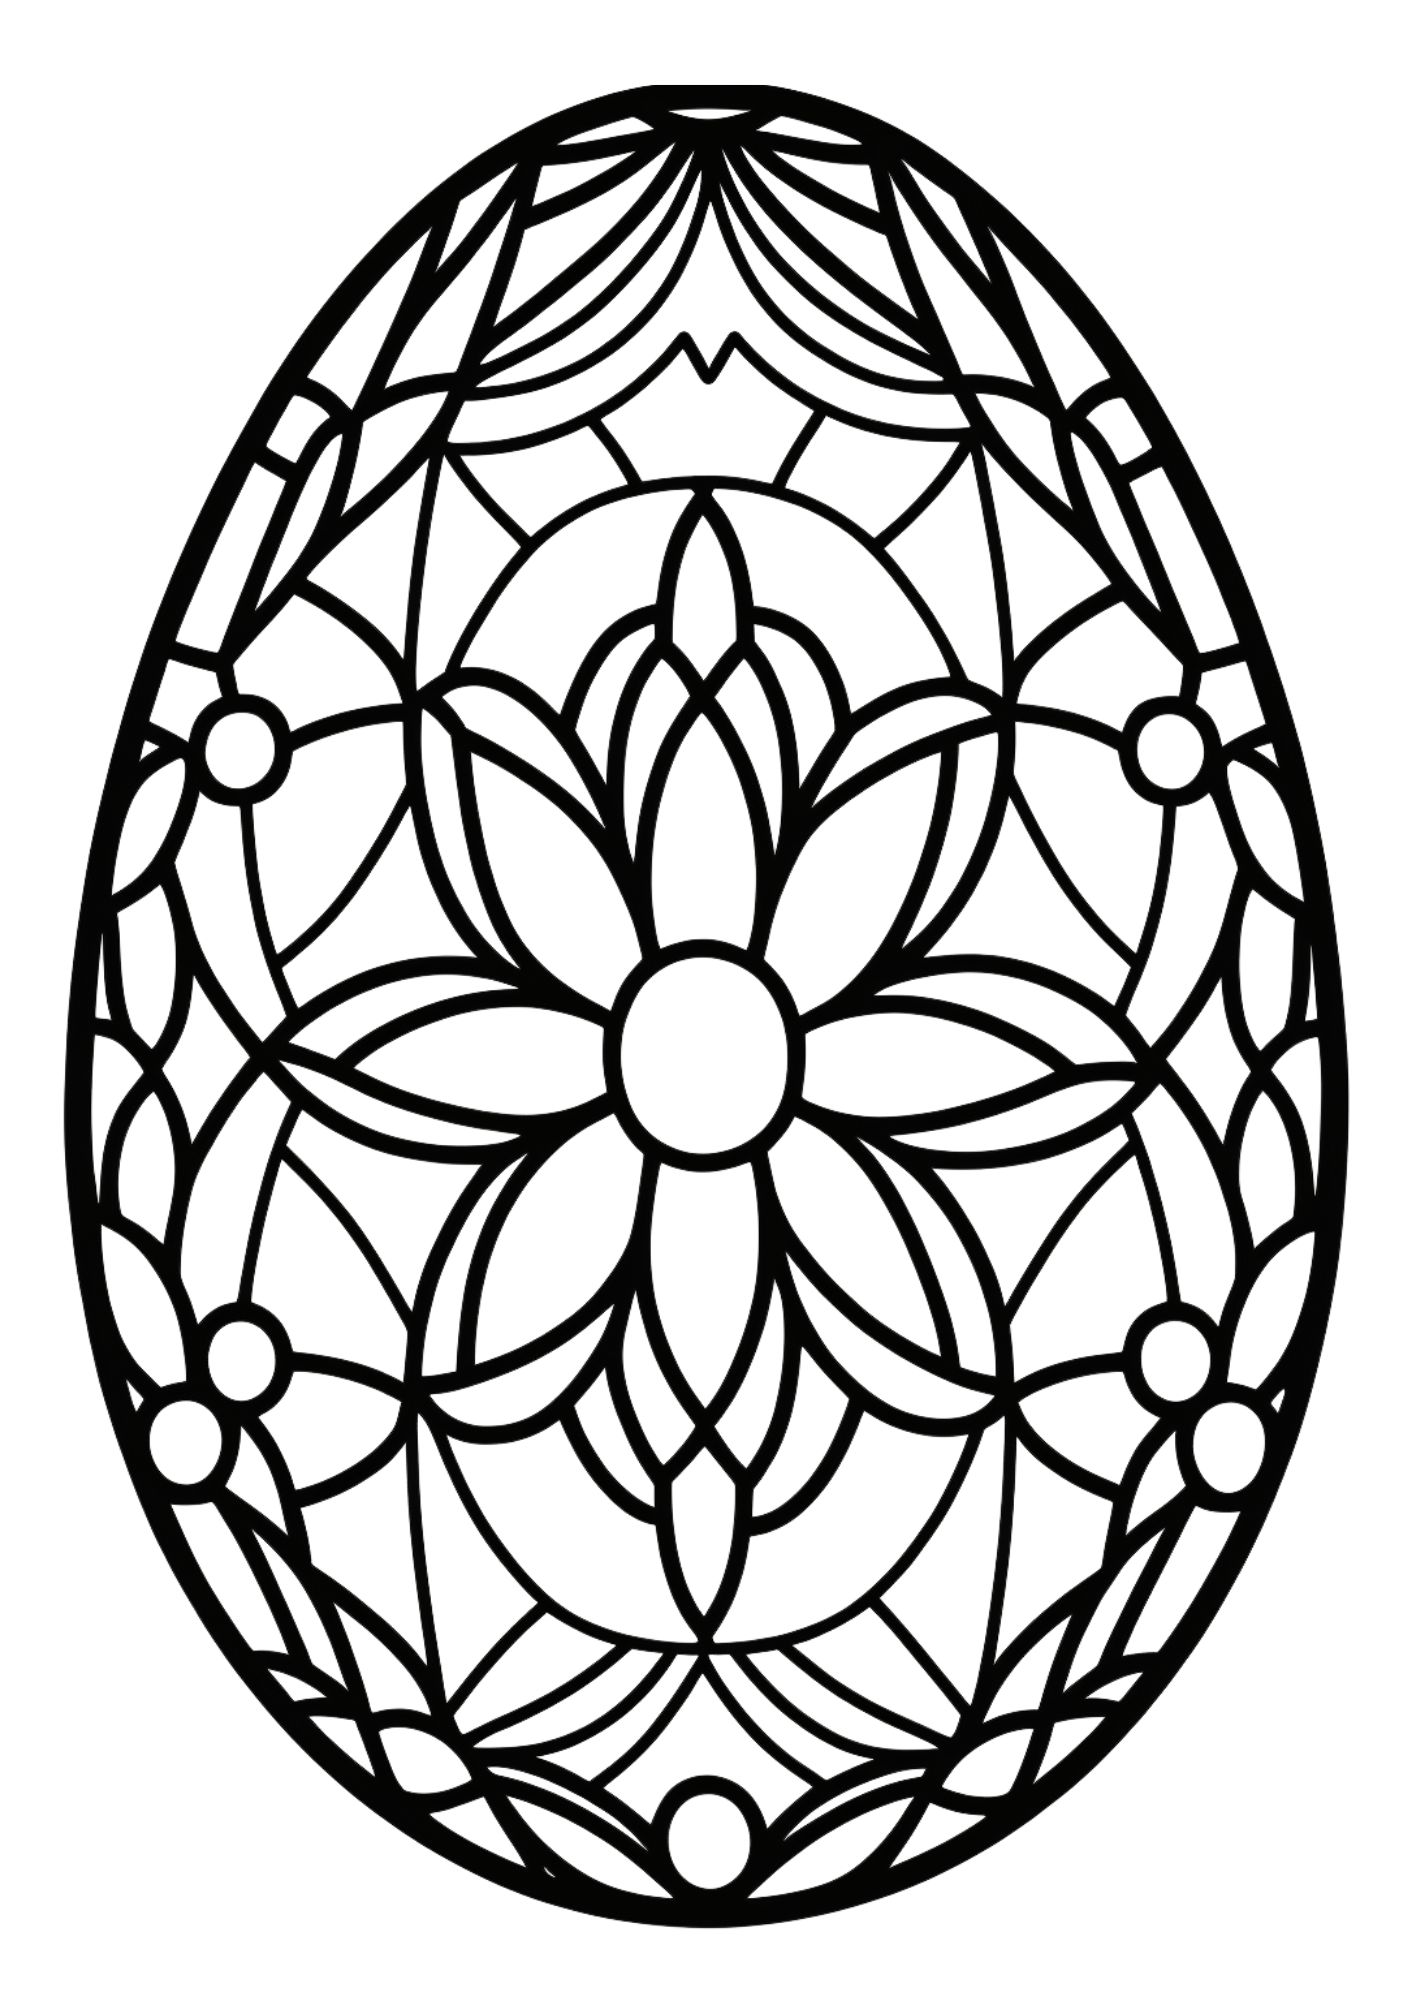 Free printable easter egg coloring pages for kids and adults to enjoy